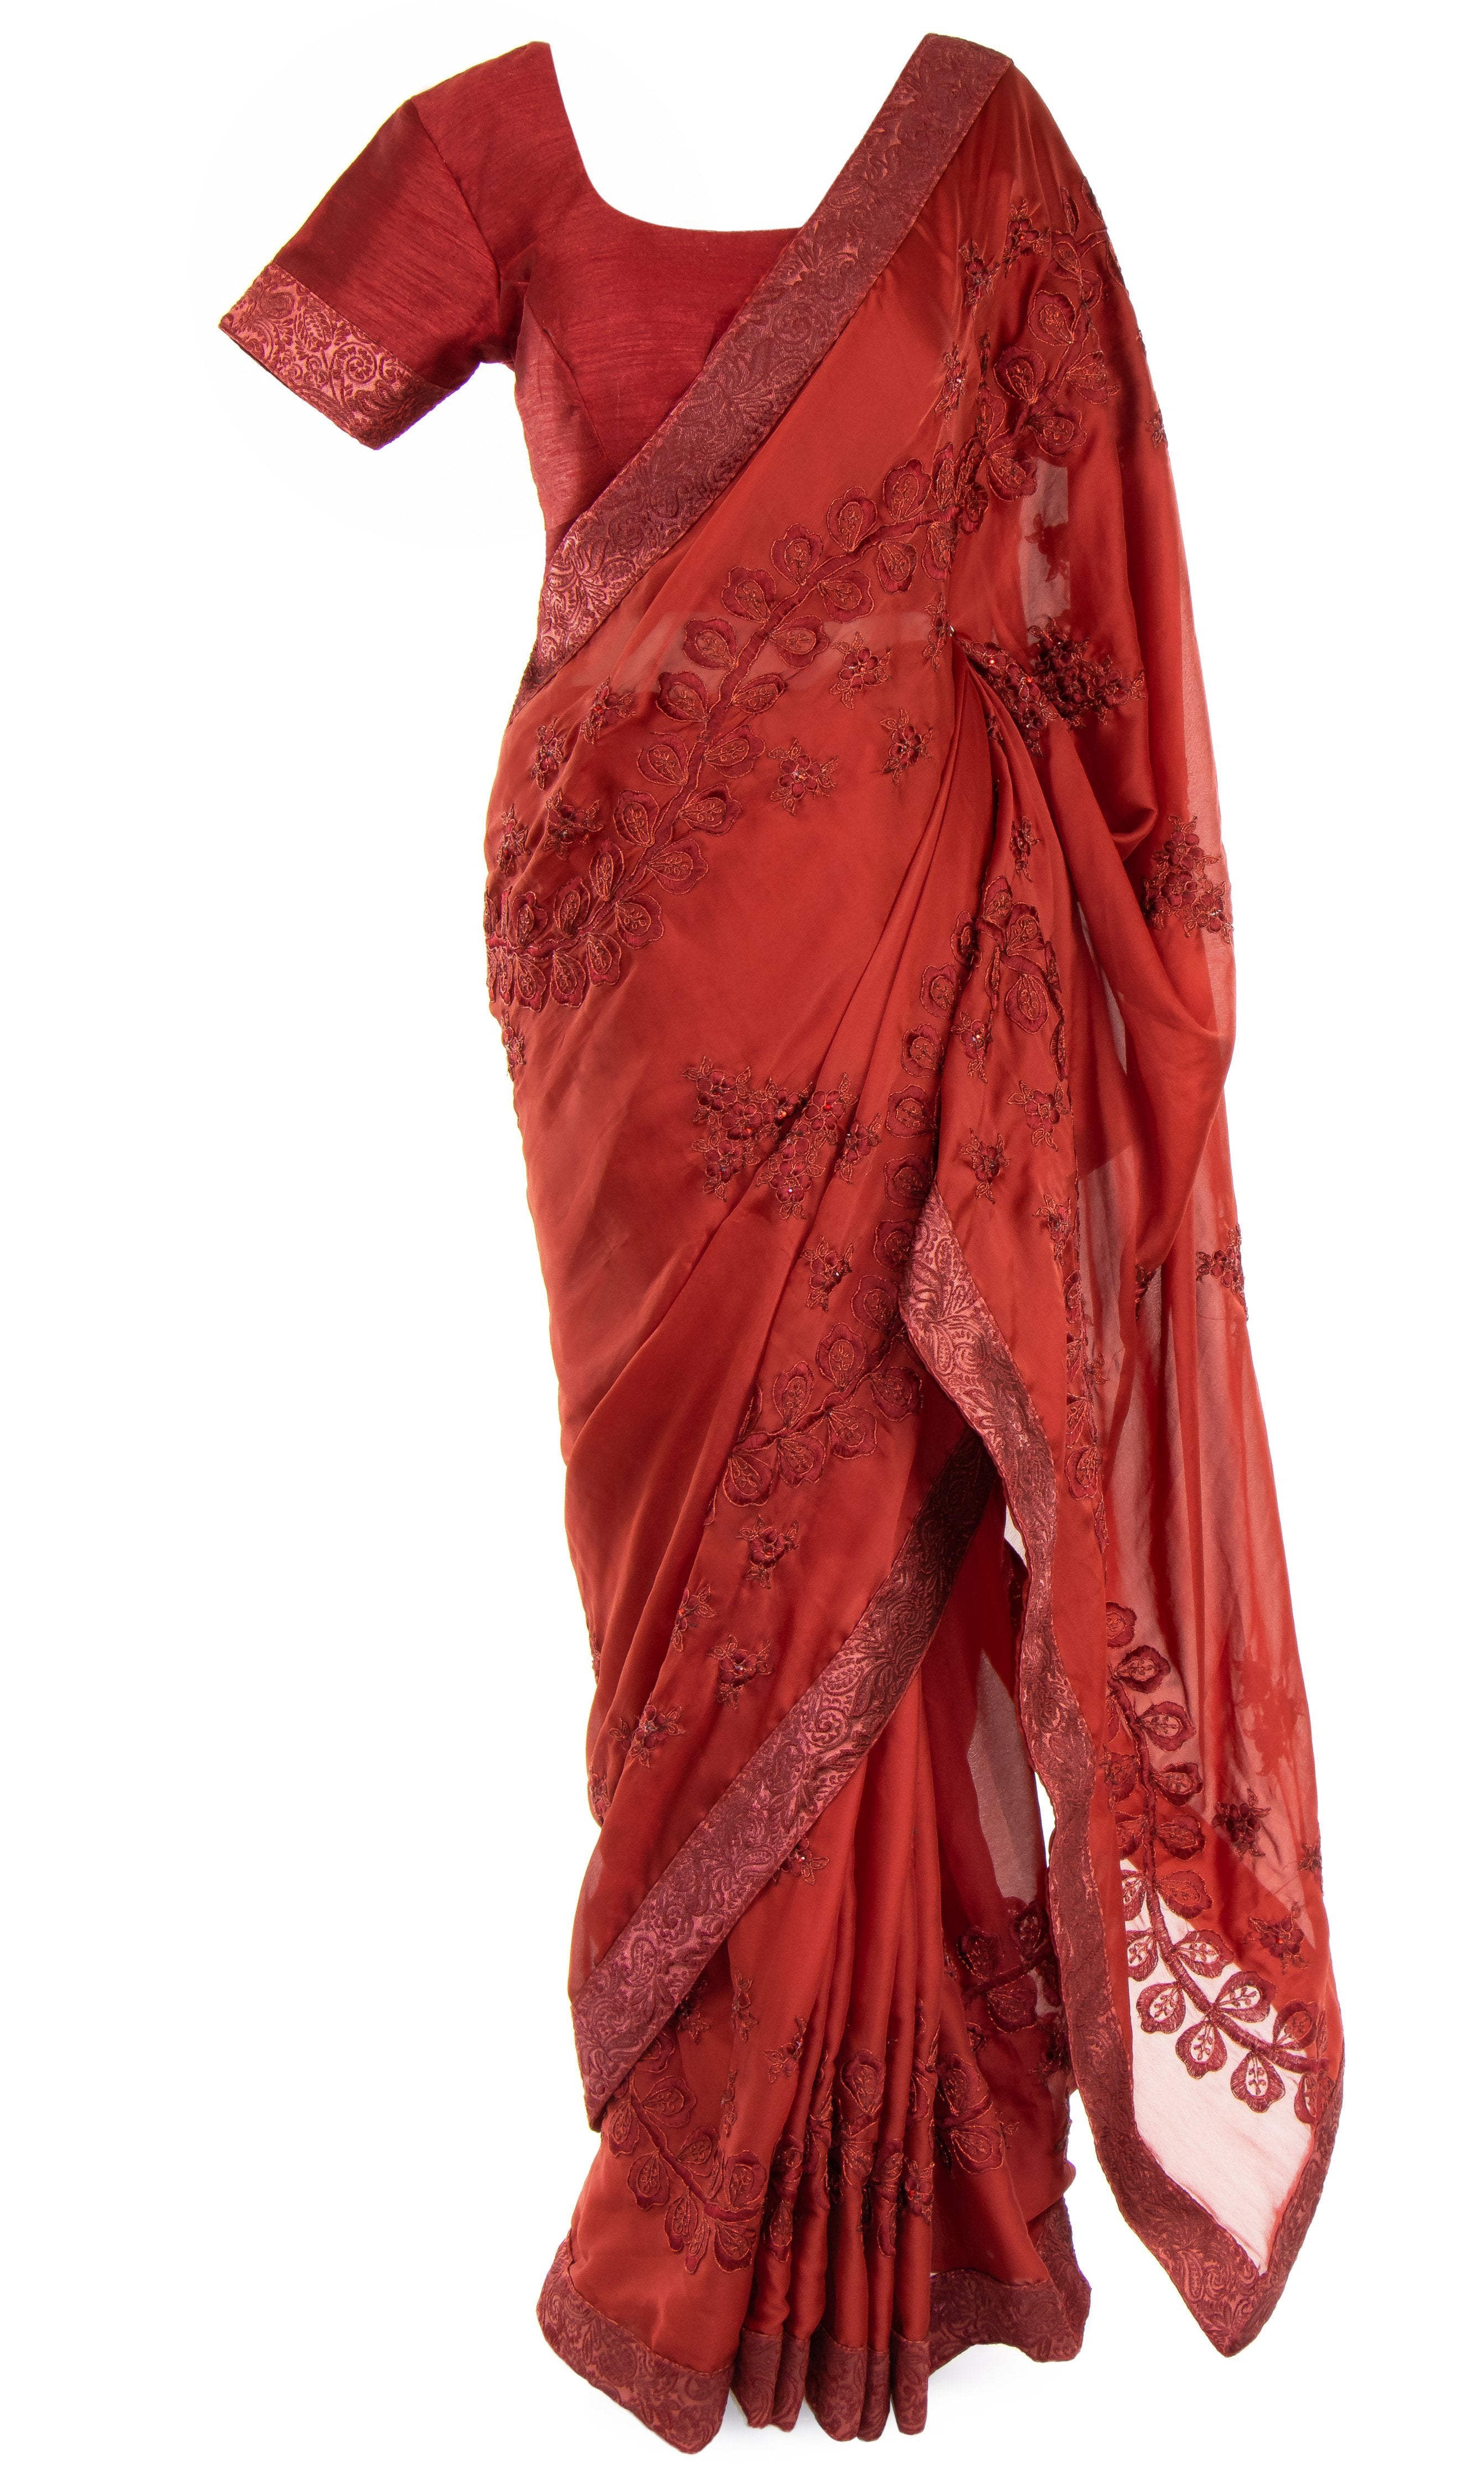 Pre-pleated burgundy Saree with embroidered classic top & subtle stone work and has a gorgeous paisley border.